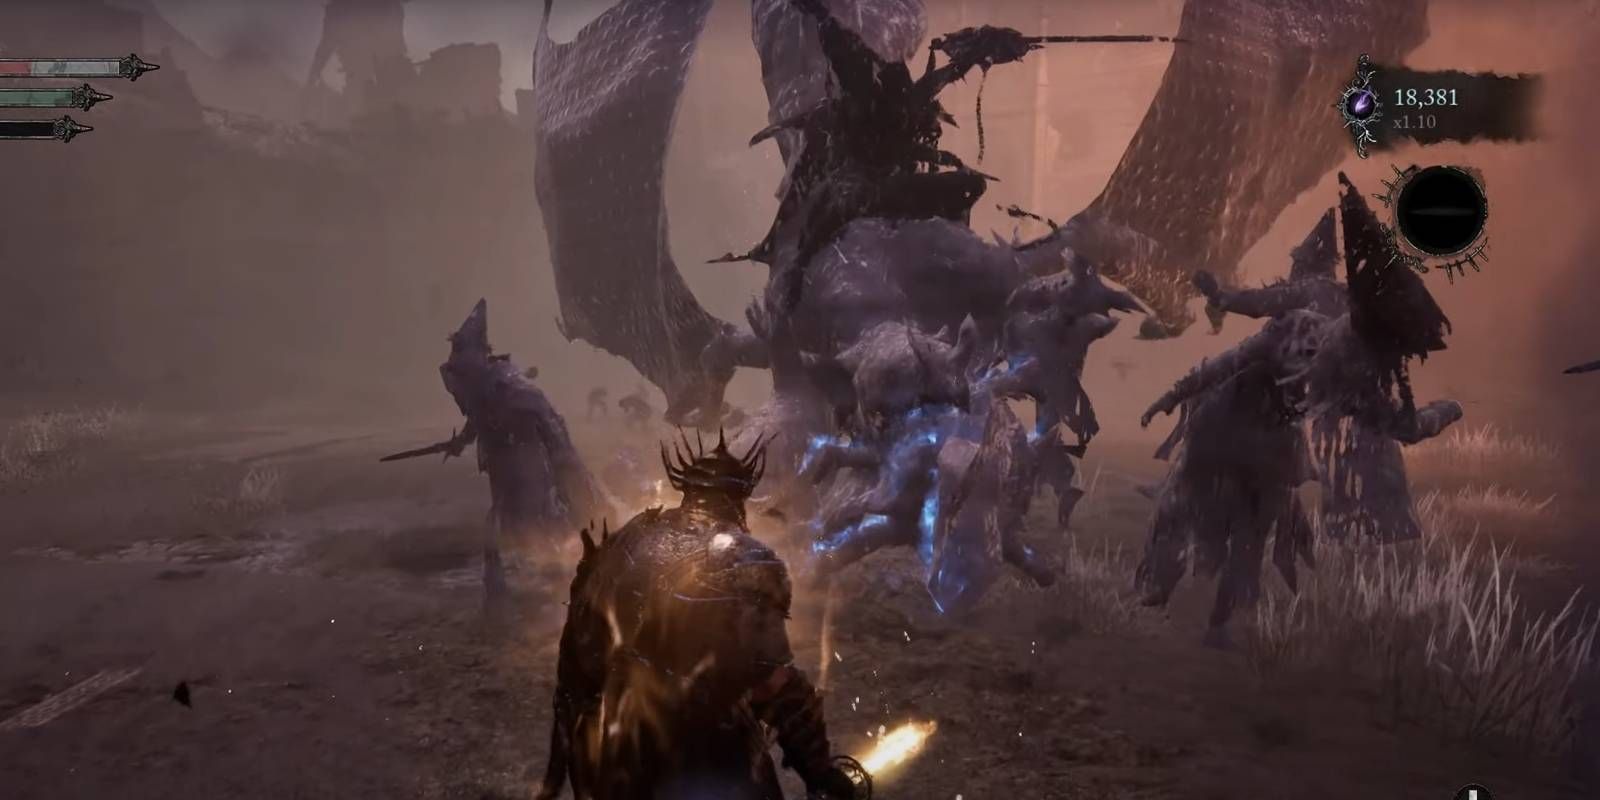 These beginner tips will help break down some of Lords of the Fallen's complex gameplay.